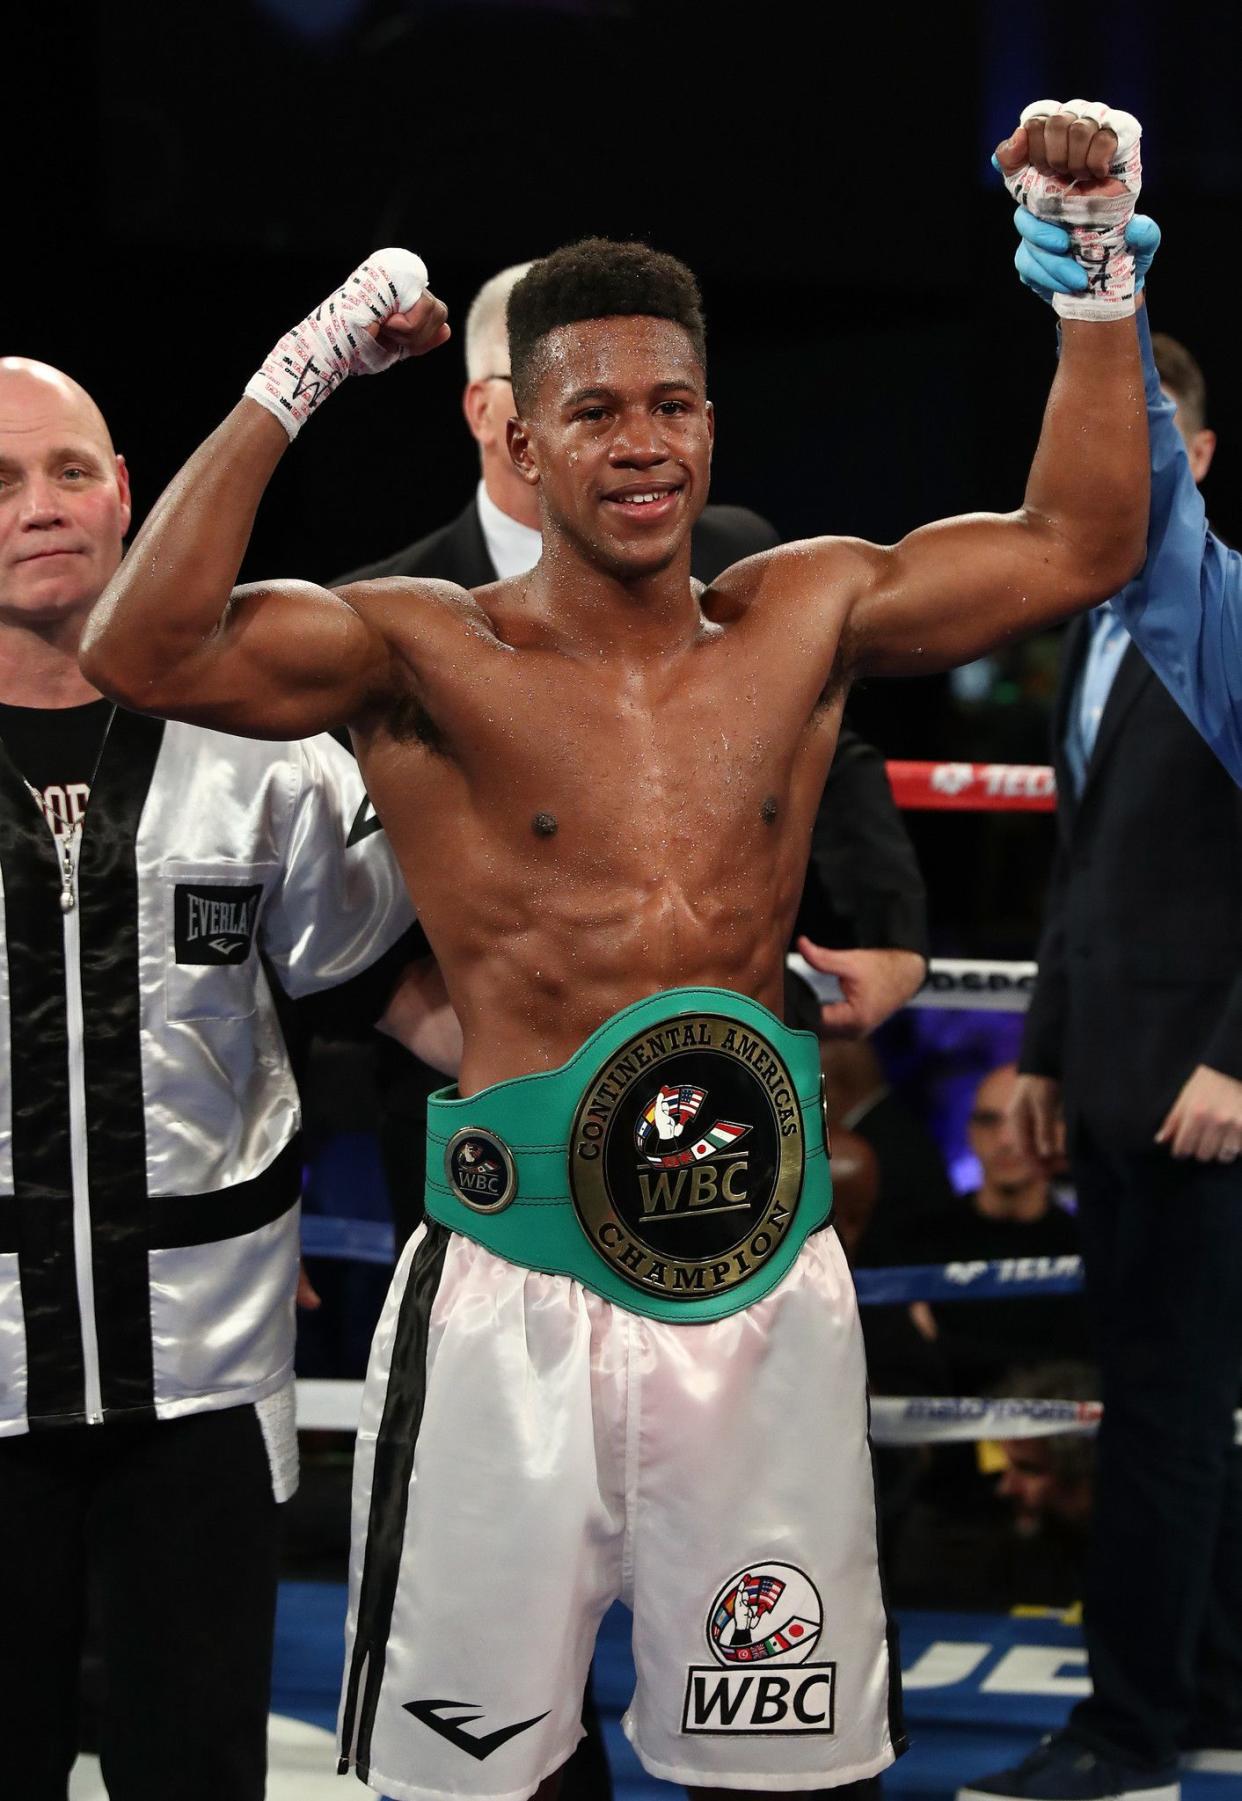 Patrick Day, a boxer and Golden Gloves winner in 2012, died on Oct. 16, 2019, from a traumatic brain injury he suffered in his super welterweight fight with Charles Conwell on October 12, in Chicago, according to a statement from promoter Lou DiBella. He was 27. DiBella also said in the statement, "He was a son, brother, and good friend to many. Pat’s kindness, positivity, and generosity of spirit made a lasting impression with everyone he met. Patrick Day didn’t need to box. He came from a good family, he was smart, educated, had good values and had other avenues available to him to earn a living. He chose to box, knowing the inherent risks that every fighter faces when he or she walks into a boxing ring. Boxing is what Pat loved to do. It’s how he inspired people and it was something that made him feel alive." Here, Day celebrates his decision win against Elvin Ayala during their junior middleweight fight on Oct. 27, 2018, at Madison Square Garden in New York.